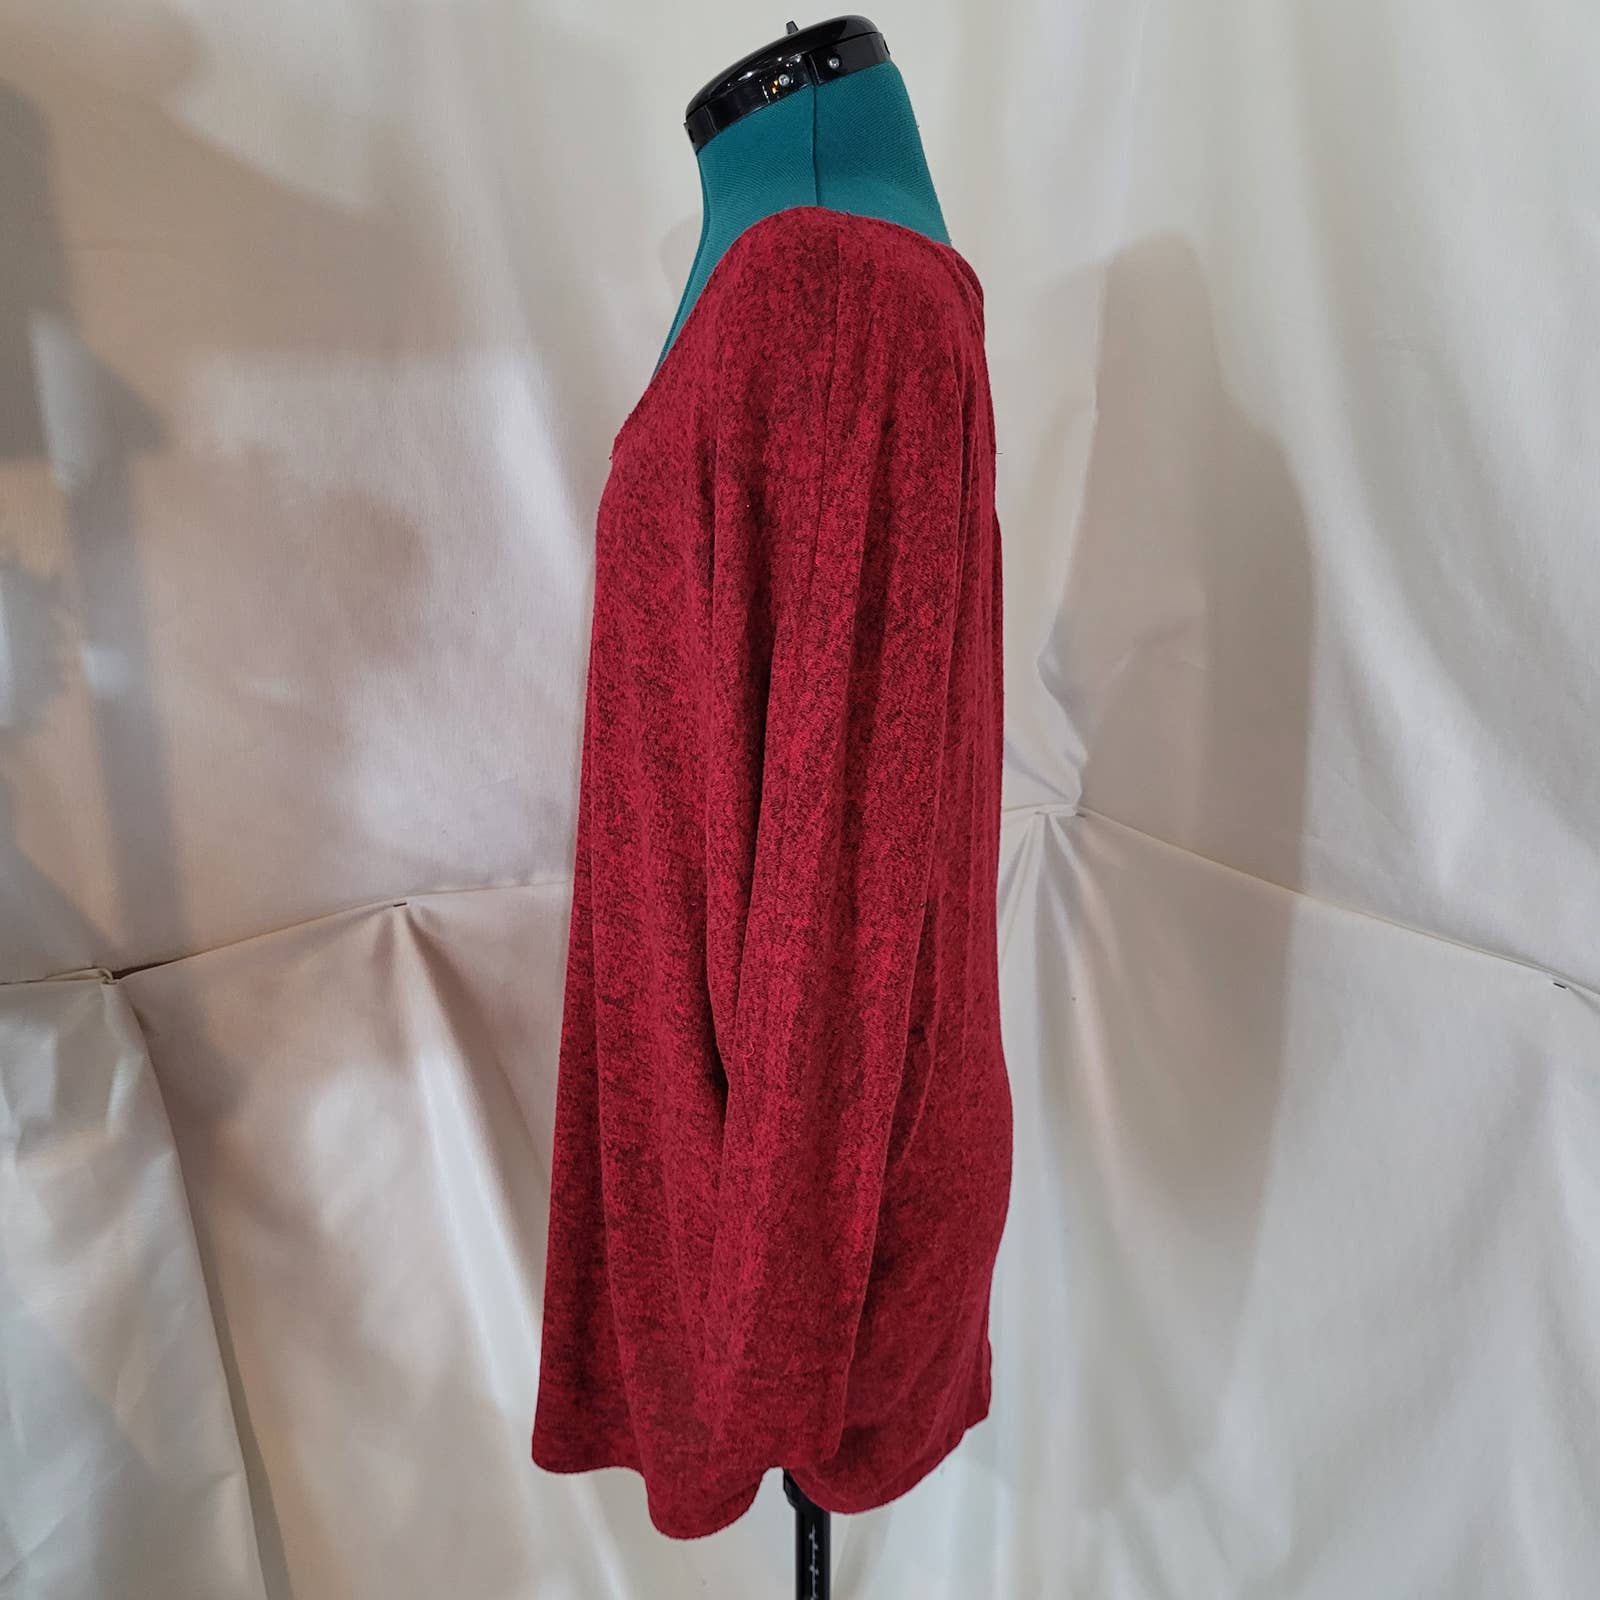 Super Soft Heathered Red Sweater with Criss Croos Back and Rouched Hips - XXLMarkita's ClosetUnbranded